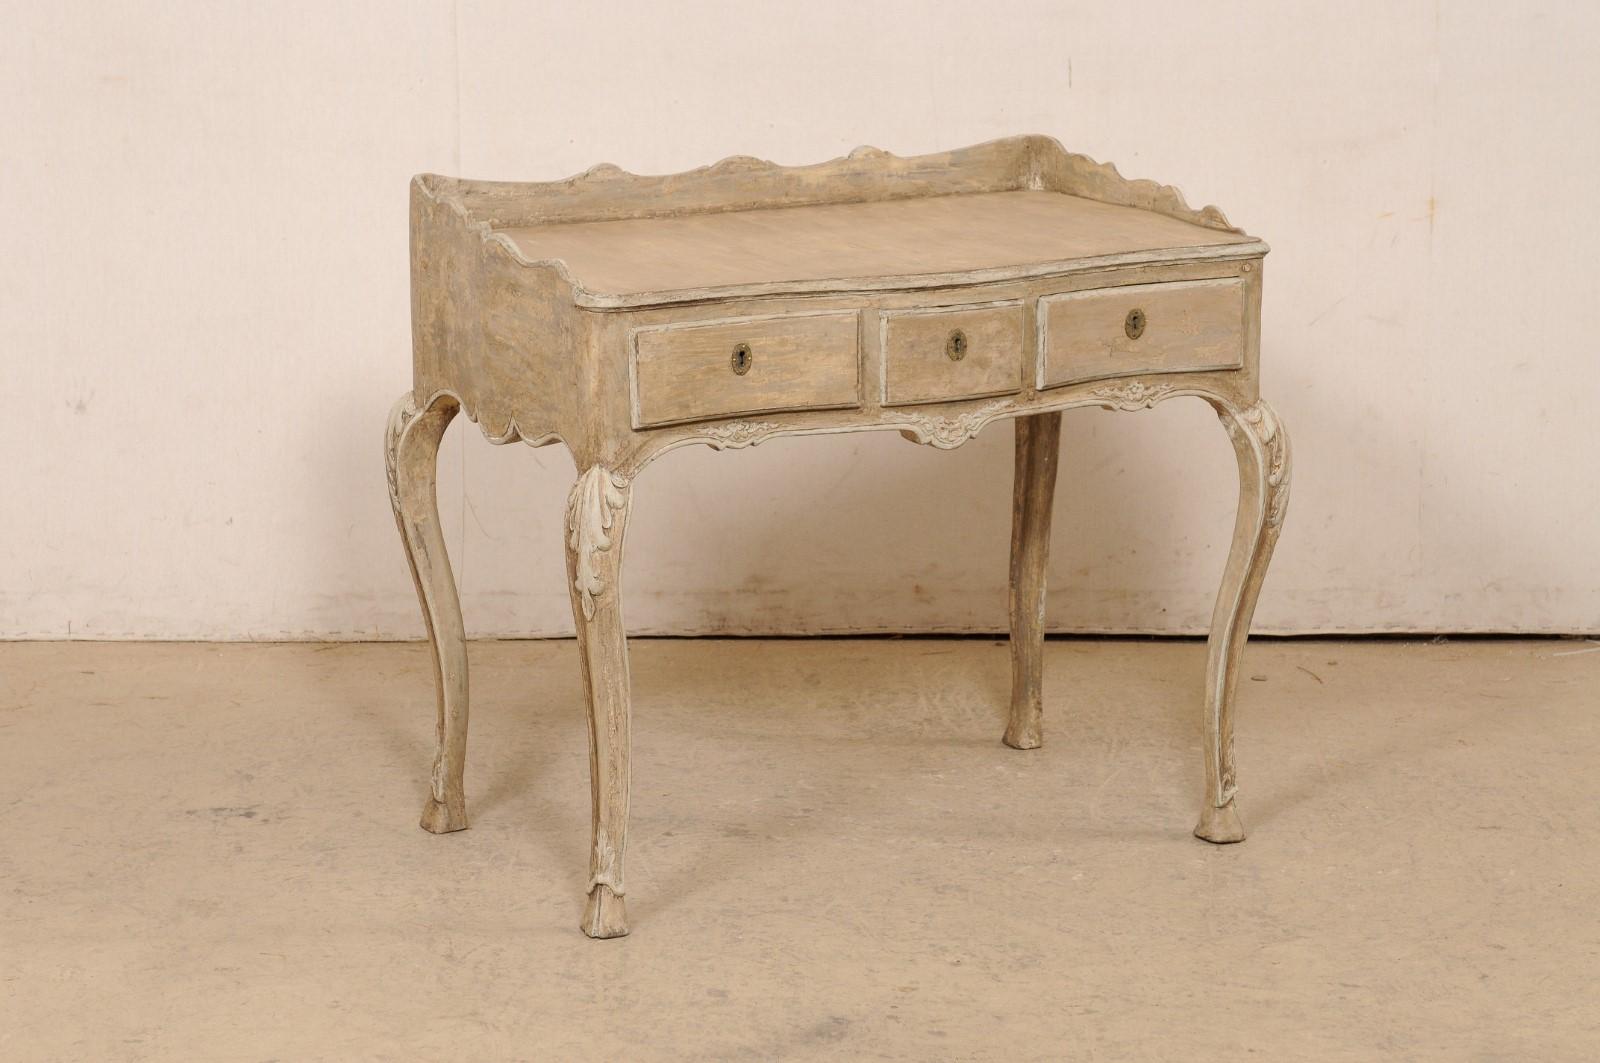 A French painted wood small-sized writing desk from the turn of the 18th and 19th century. This antique table from France has a rectangular-shaped top with a raised and beautifully scallop-carved lip which frames in the back and sides. The apron